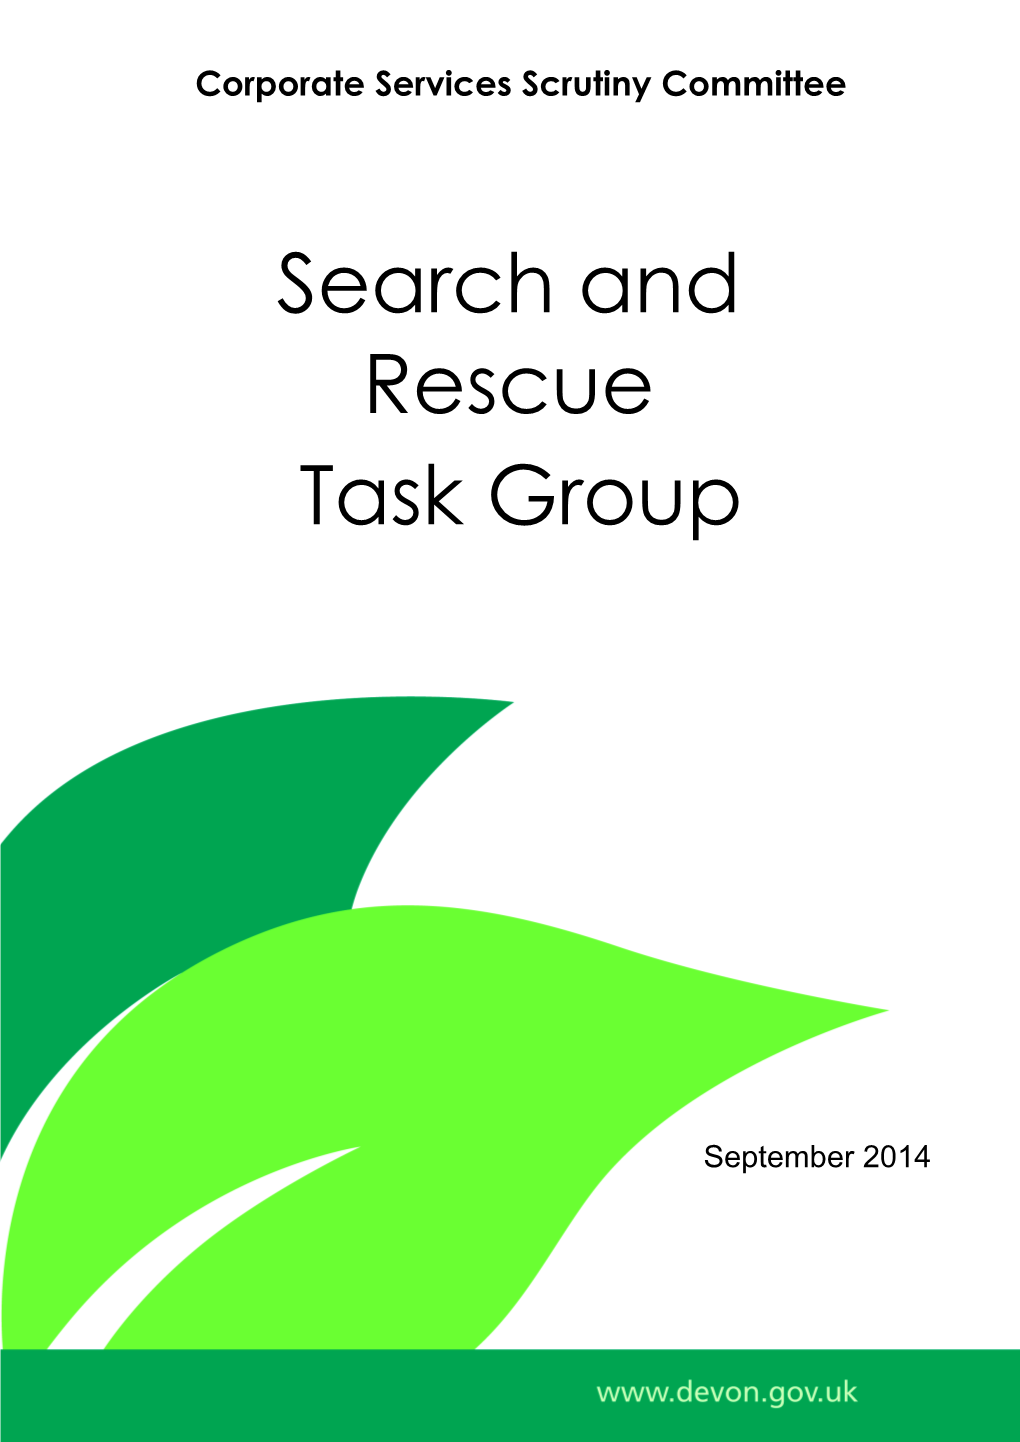 Search and Rescue Task Group